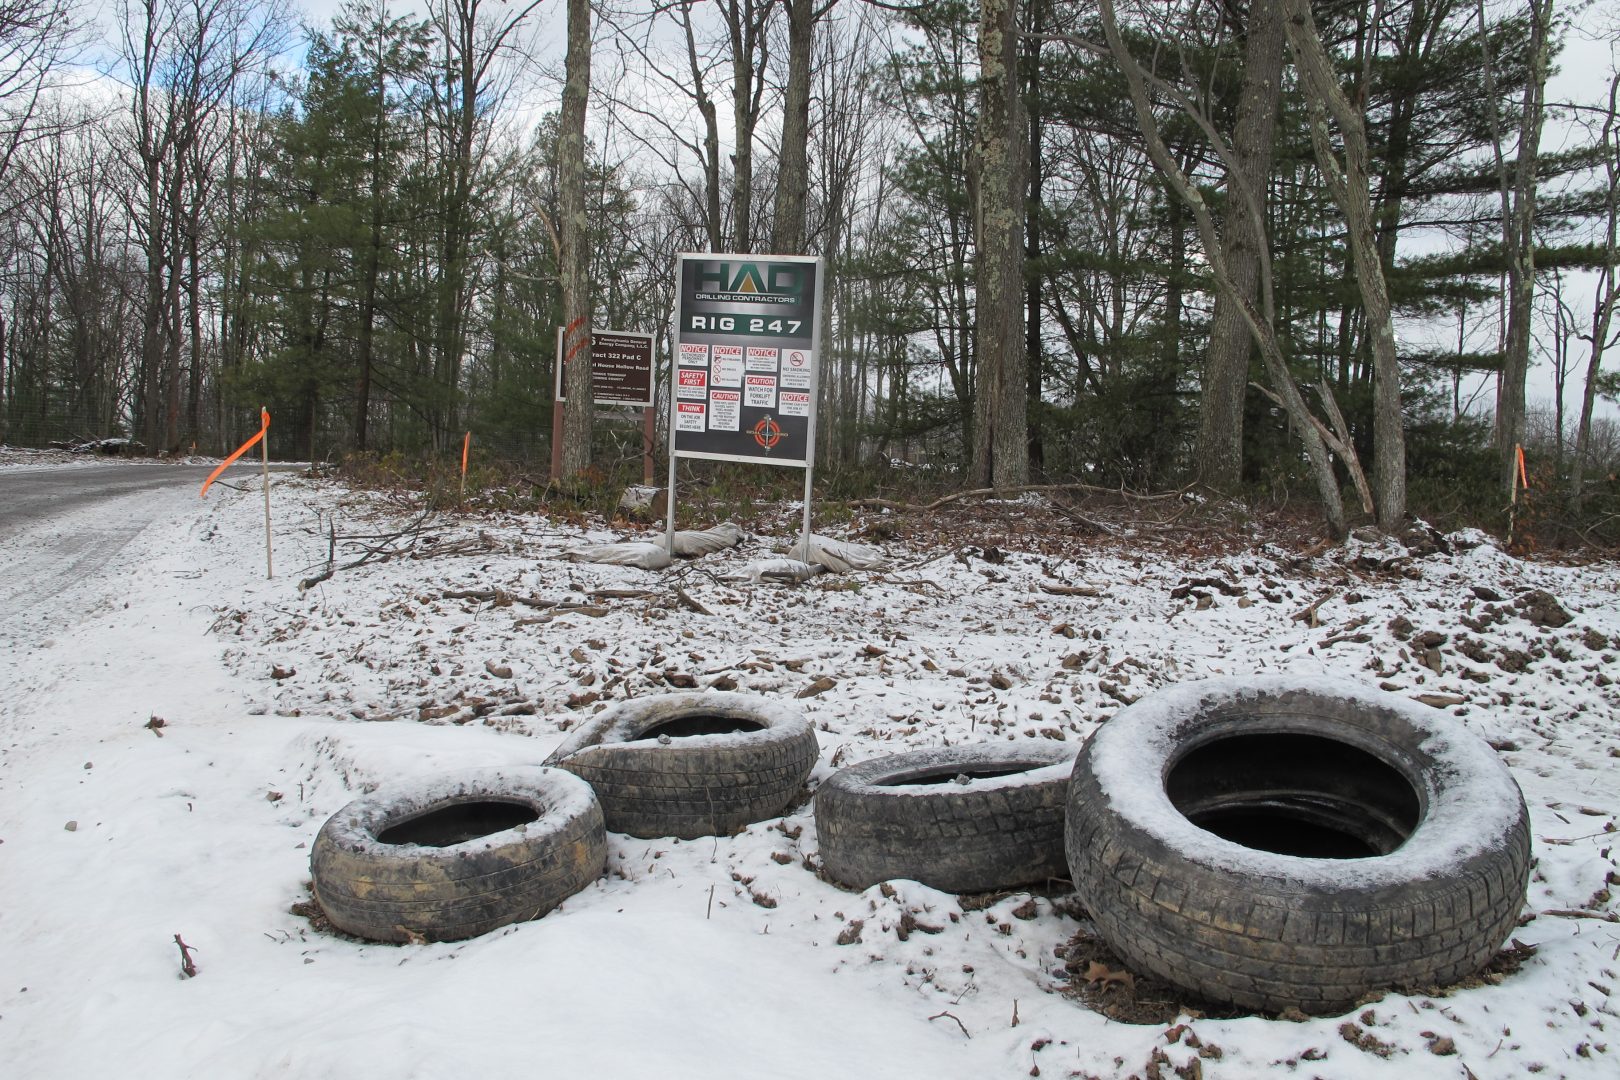 Discarded tires next to a gas well pad in the Tiadaghton State Forest.